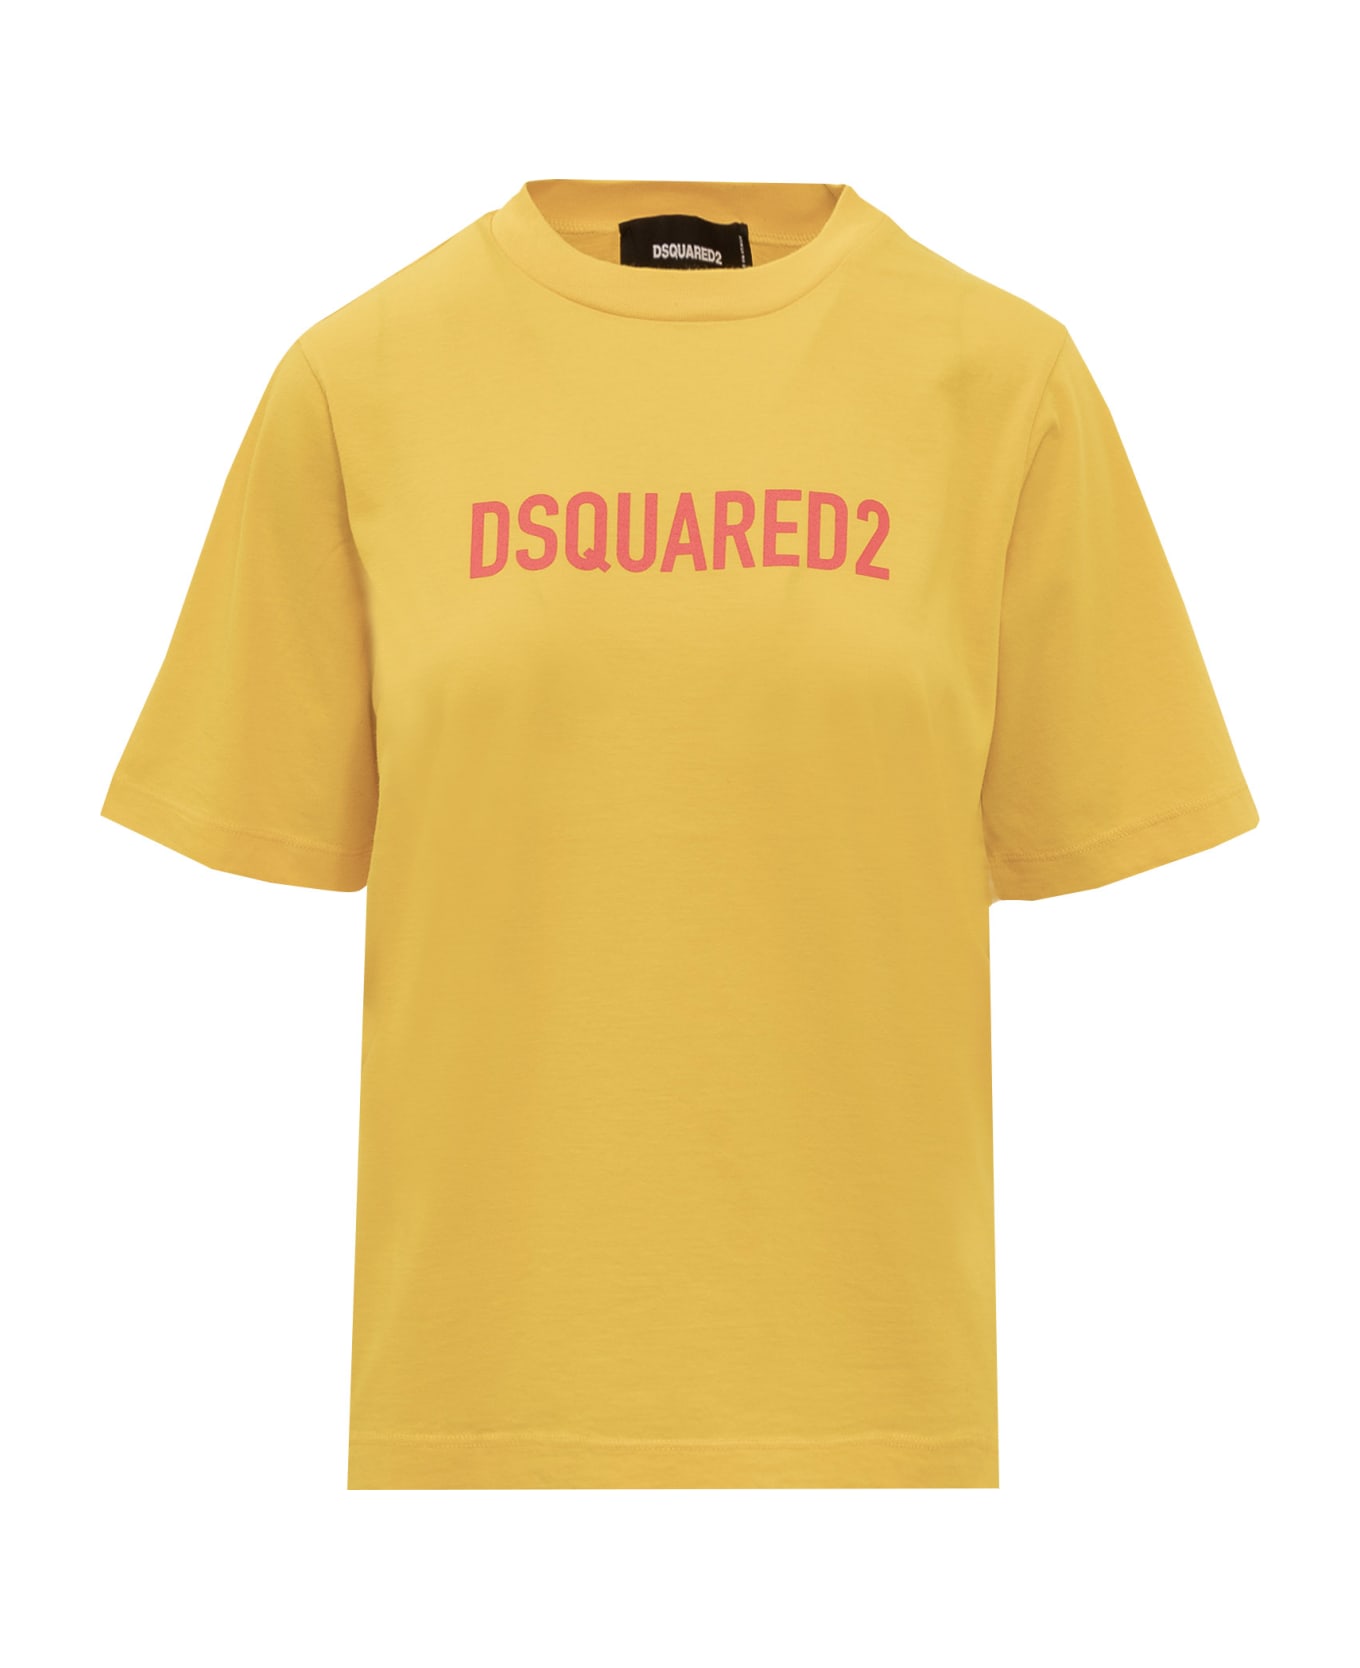 Dsquared2 Easy T-shirt - CYBER YELLOW